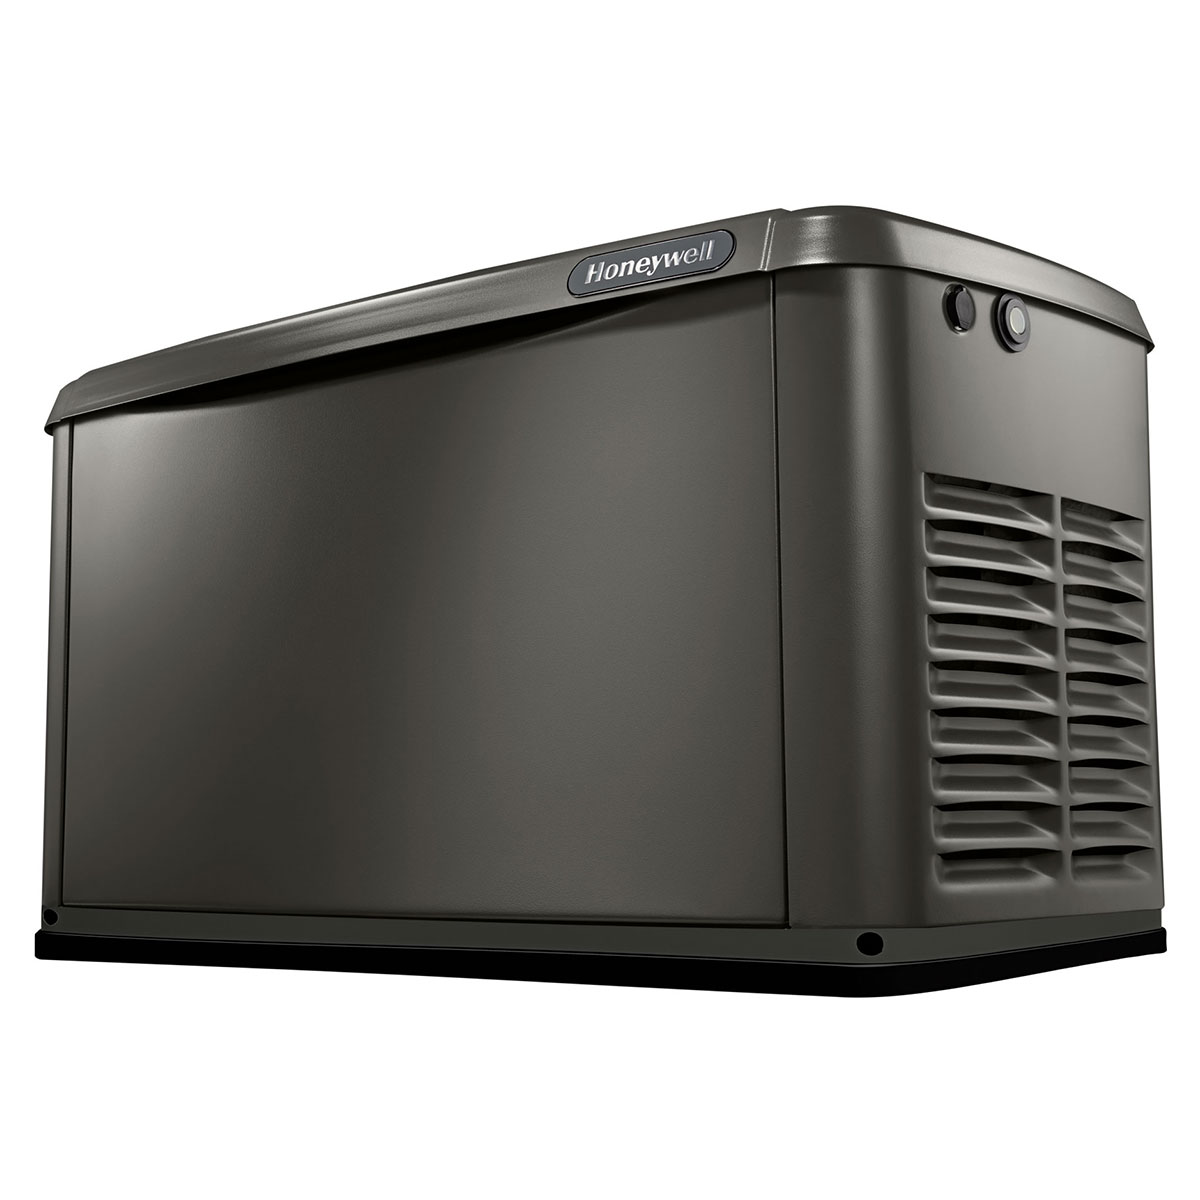 Honeywell 18kW Air Cooled Home Standby Generator, WiFi-Enabled - 7230